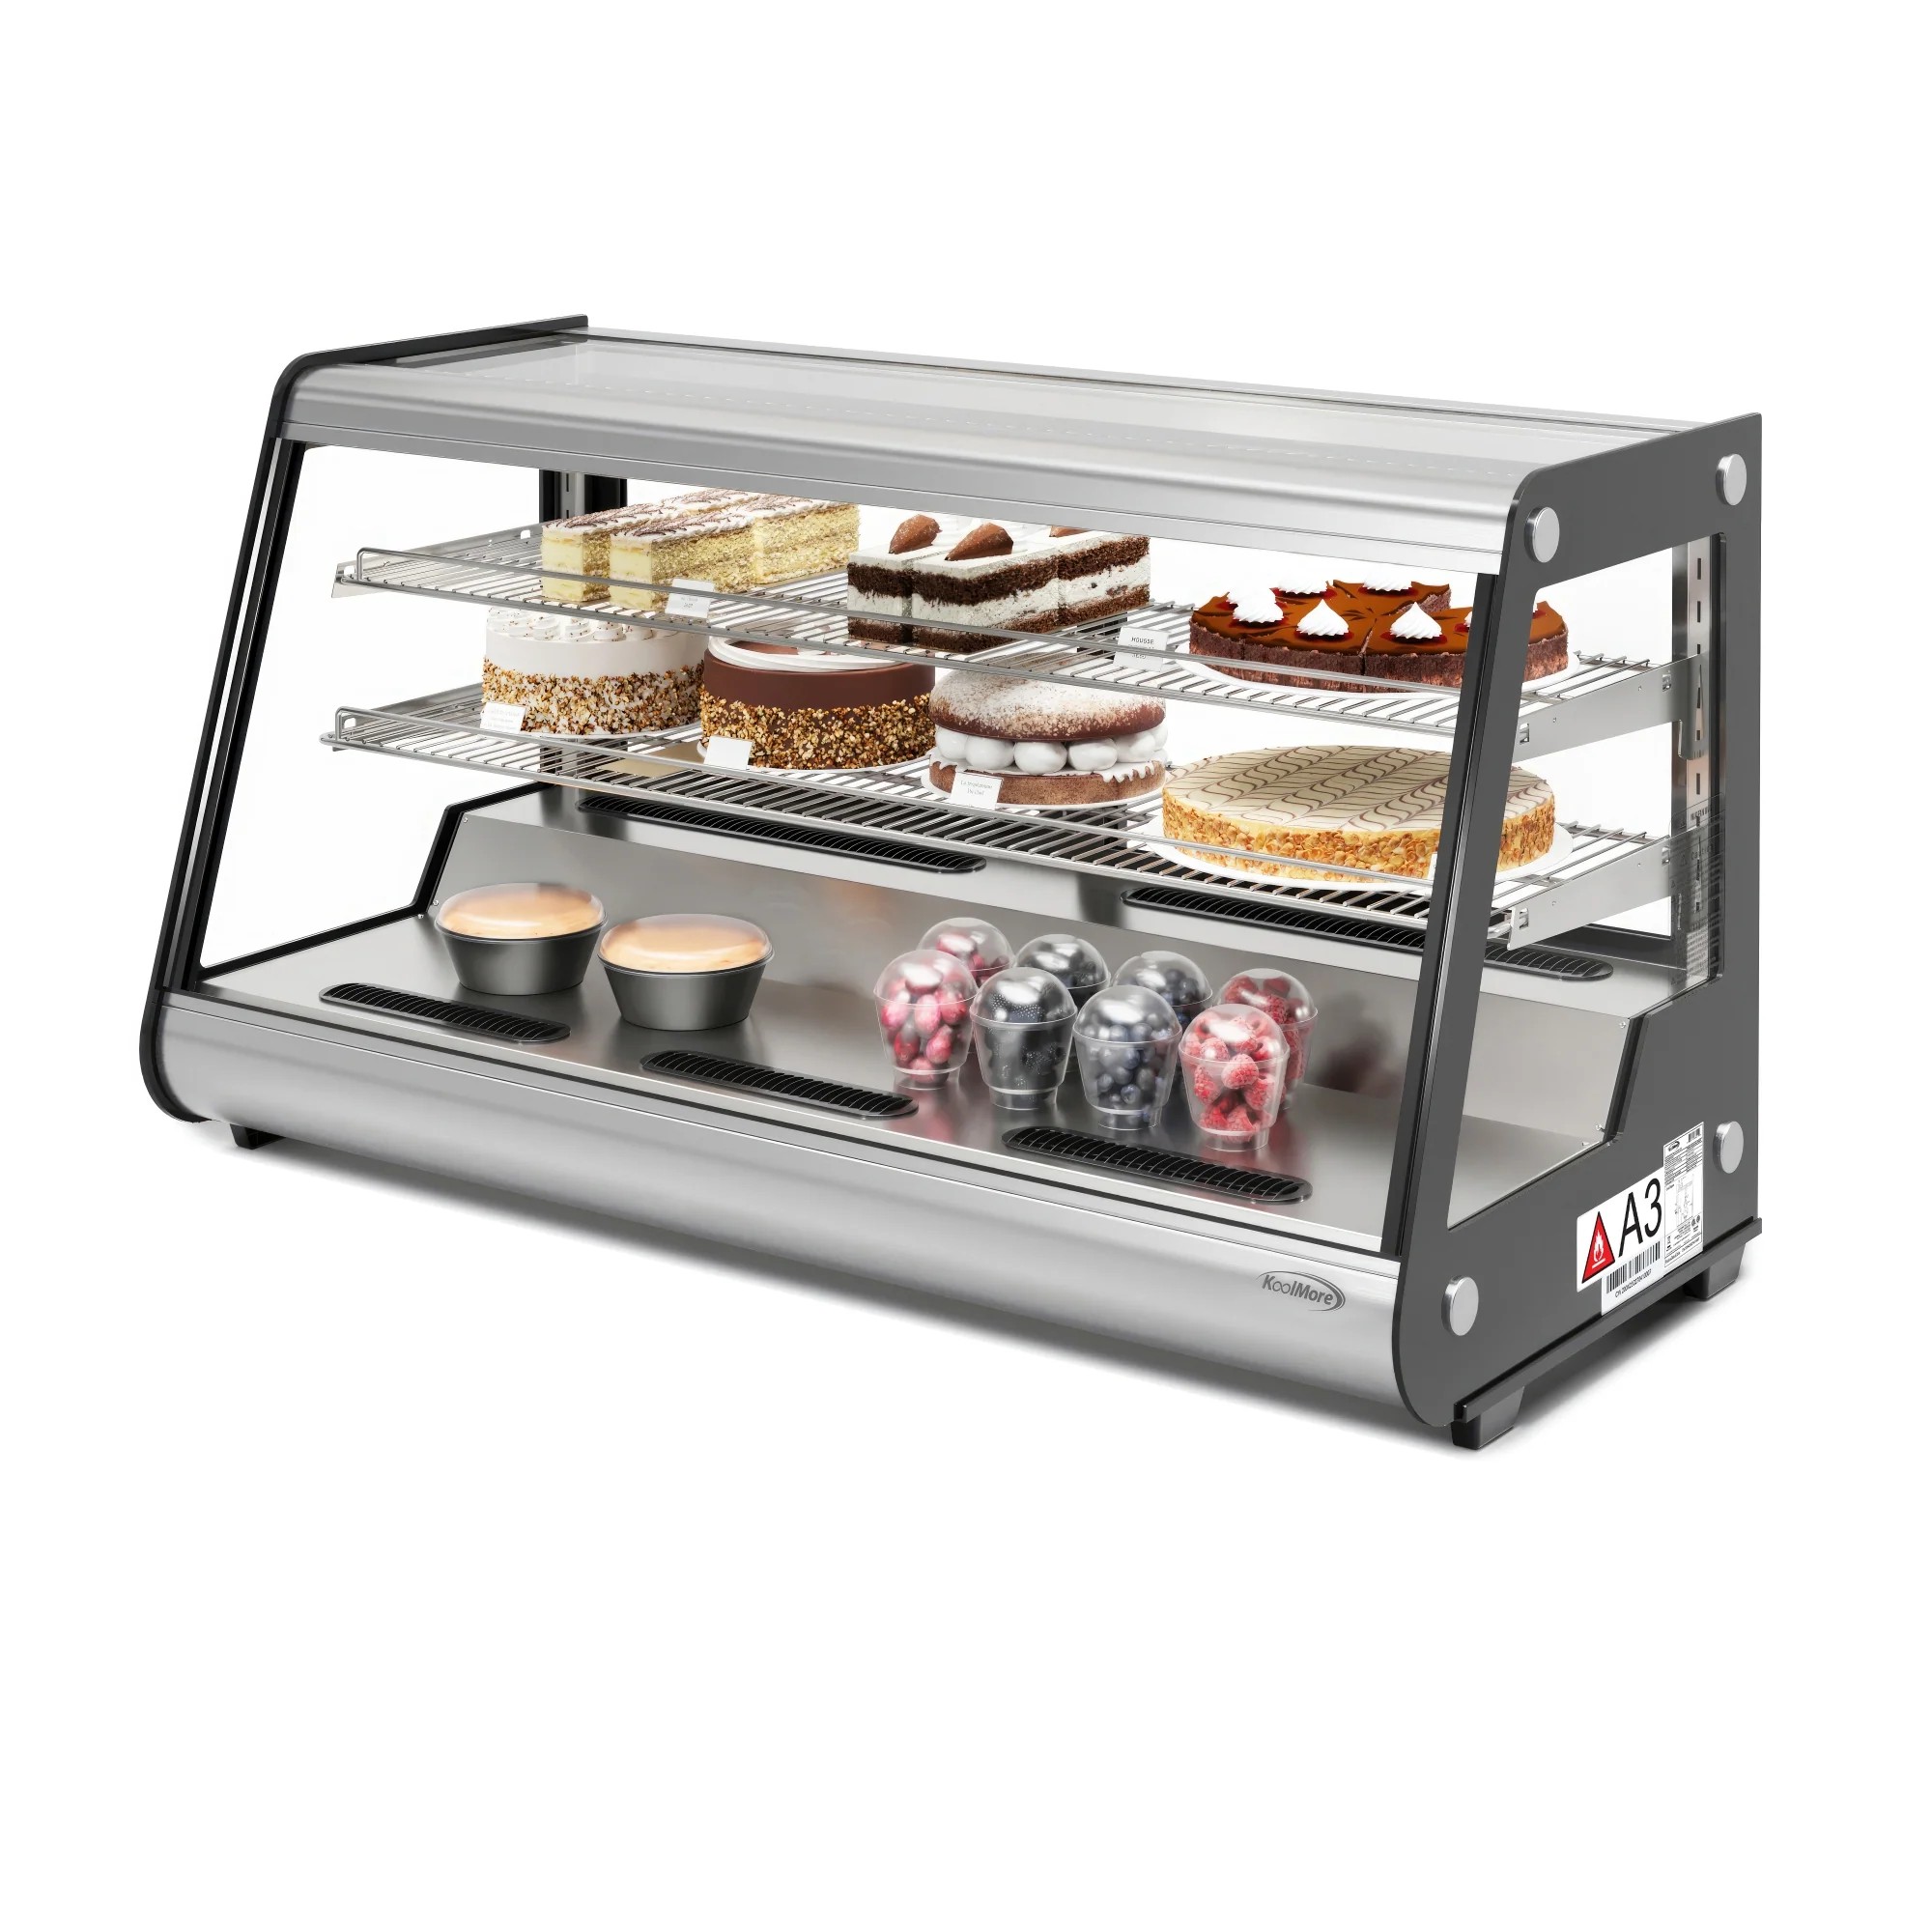 Koolmore CDC-7C-SS 48" Countertop Refrigerated Bakery Display Case in Stainless Steel